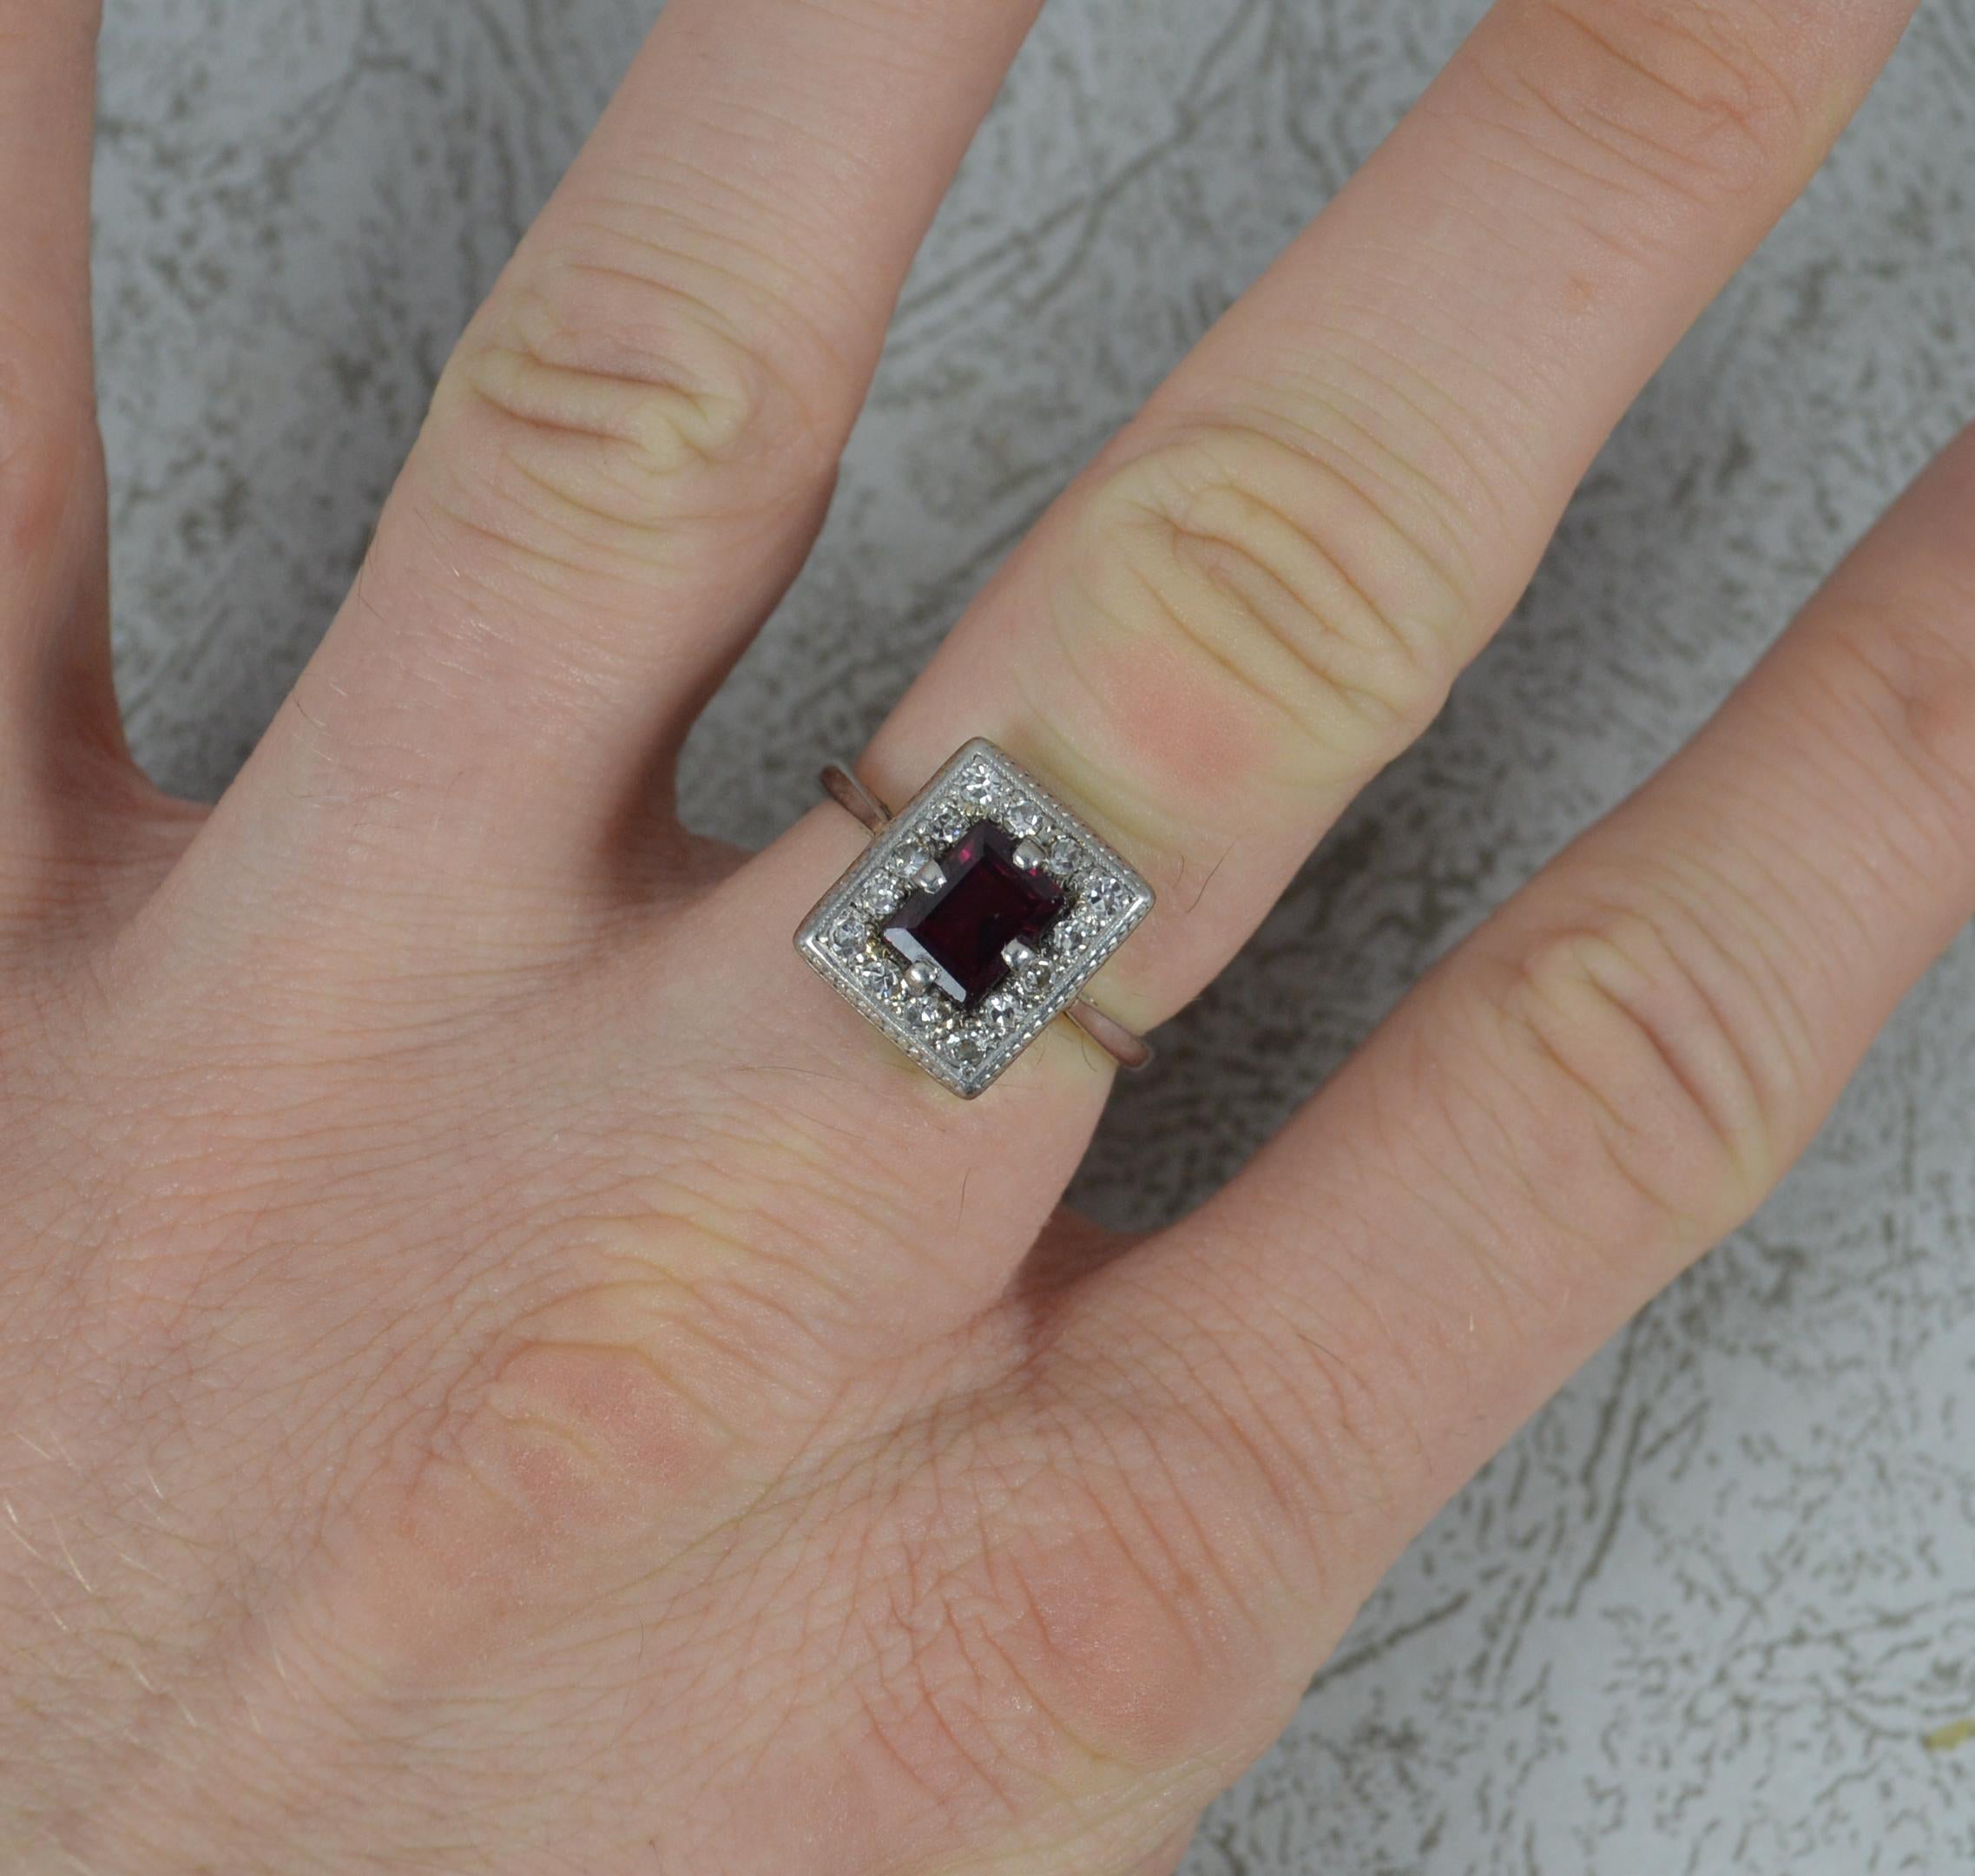 A superb Art Deco period panel cluster ring. c1930.
Solid 18 carat white gold example.
Designed with a rectangular cut garnet to centre with full round cut diamond border and engraved finish.
11mm x 12.5mm cluster head. Sitting snug to the